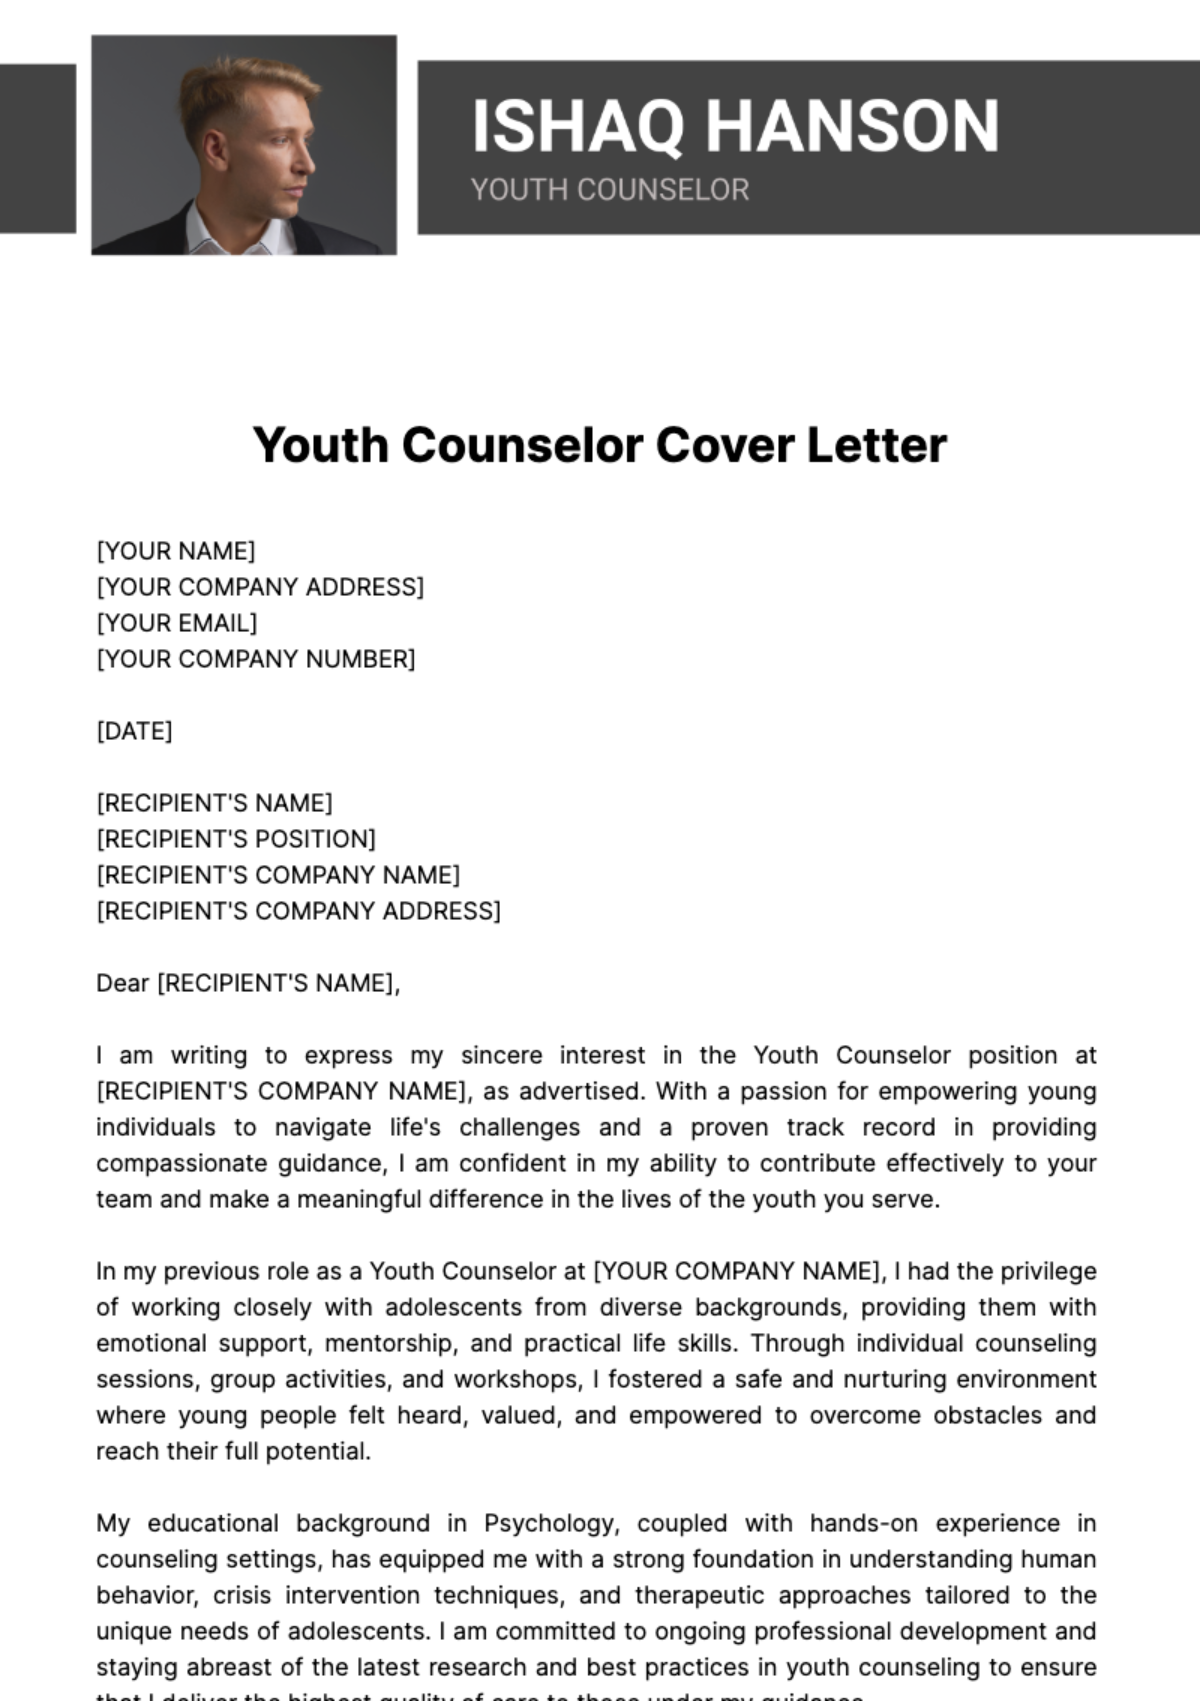 Free Youth Counselor Cover Letter Template